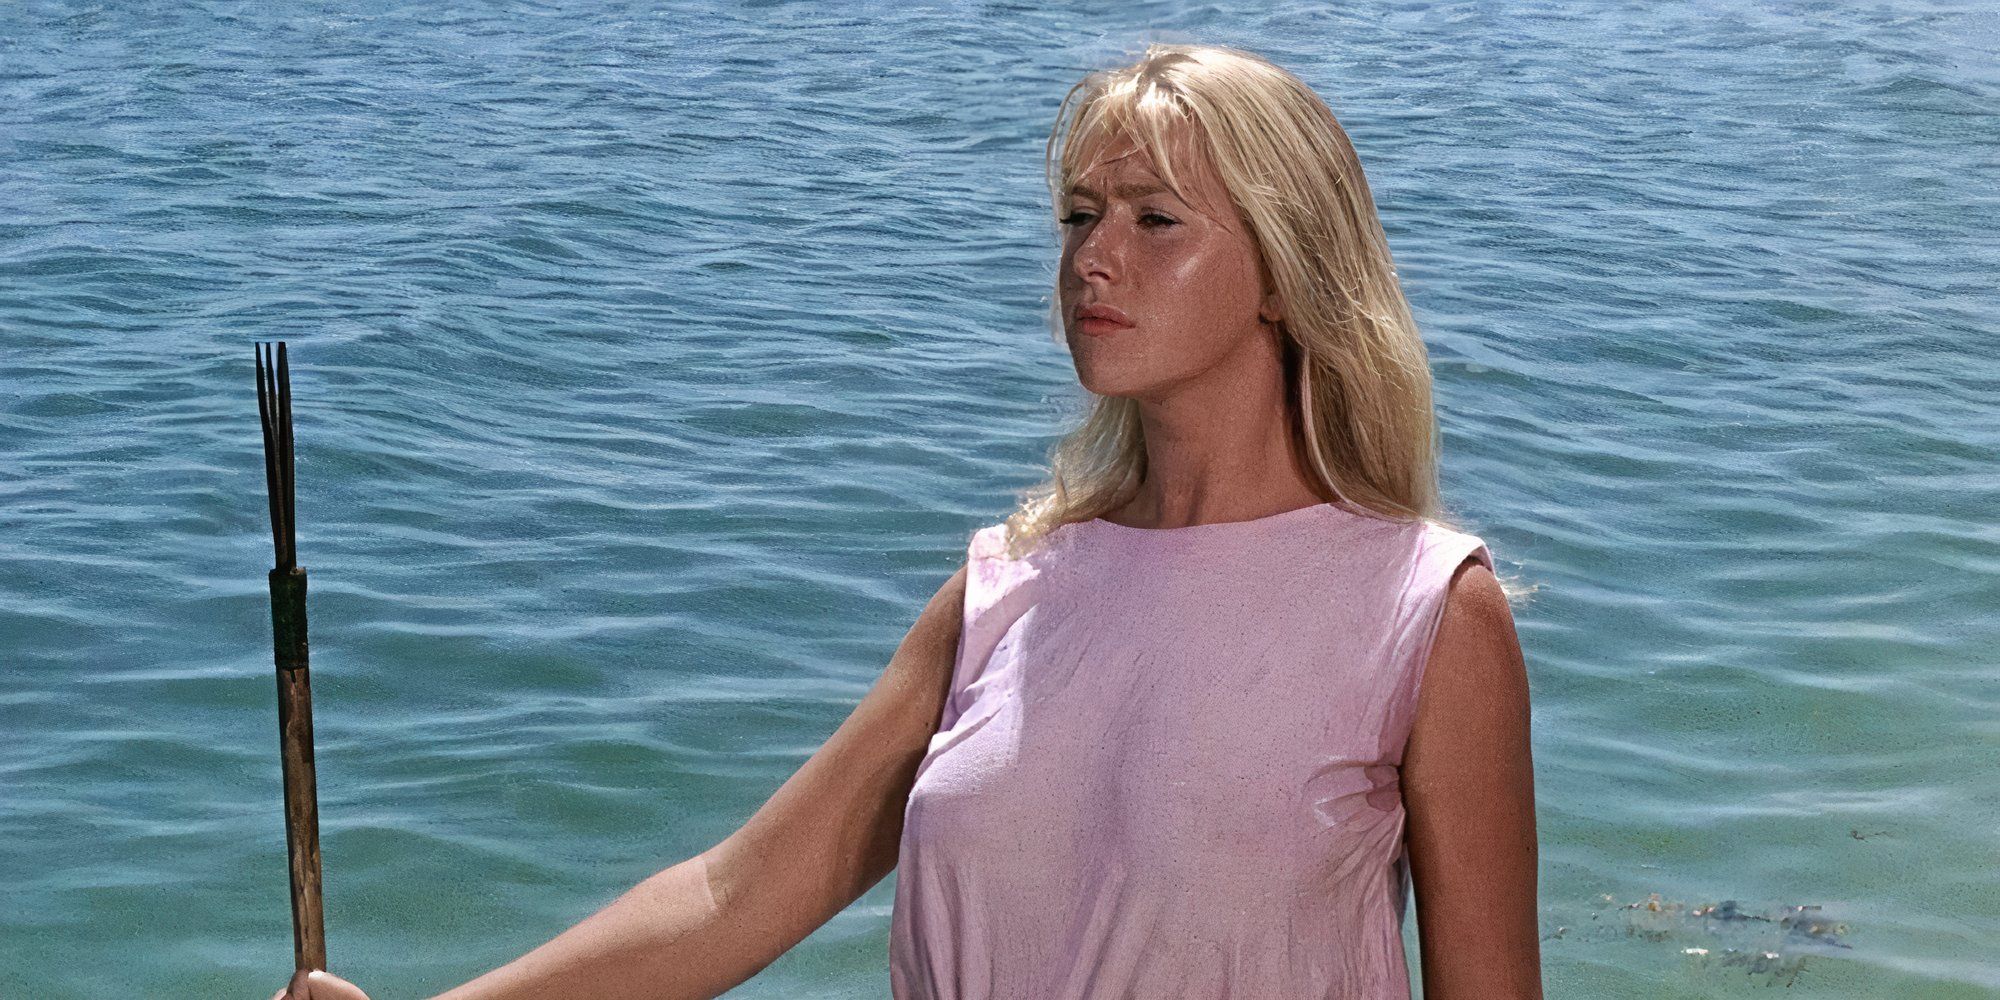 Helen Mirren as Cora Ryan holding a stick near the ocean in Age of Consent.